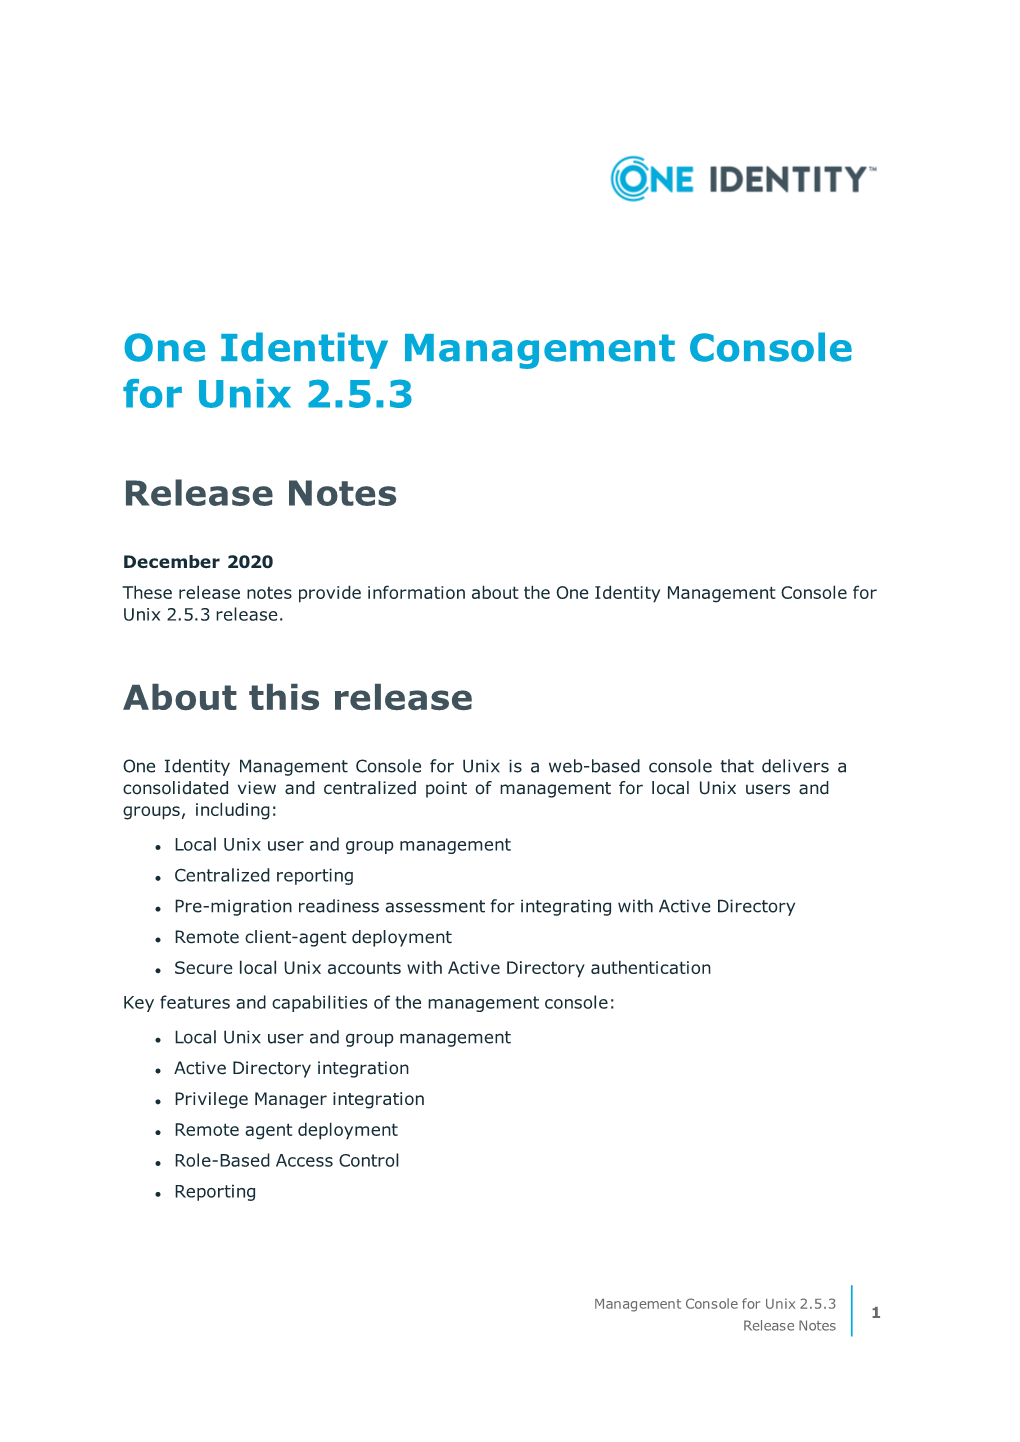 One Identity Management Console for Unix 2.5.3 Release Notes